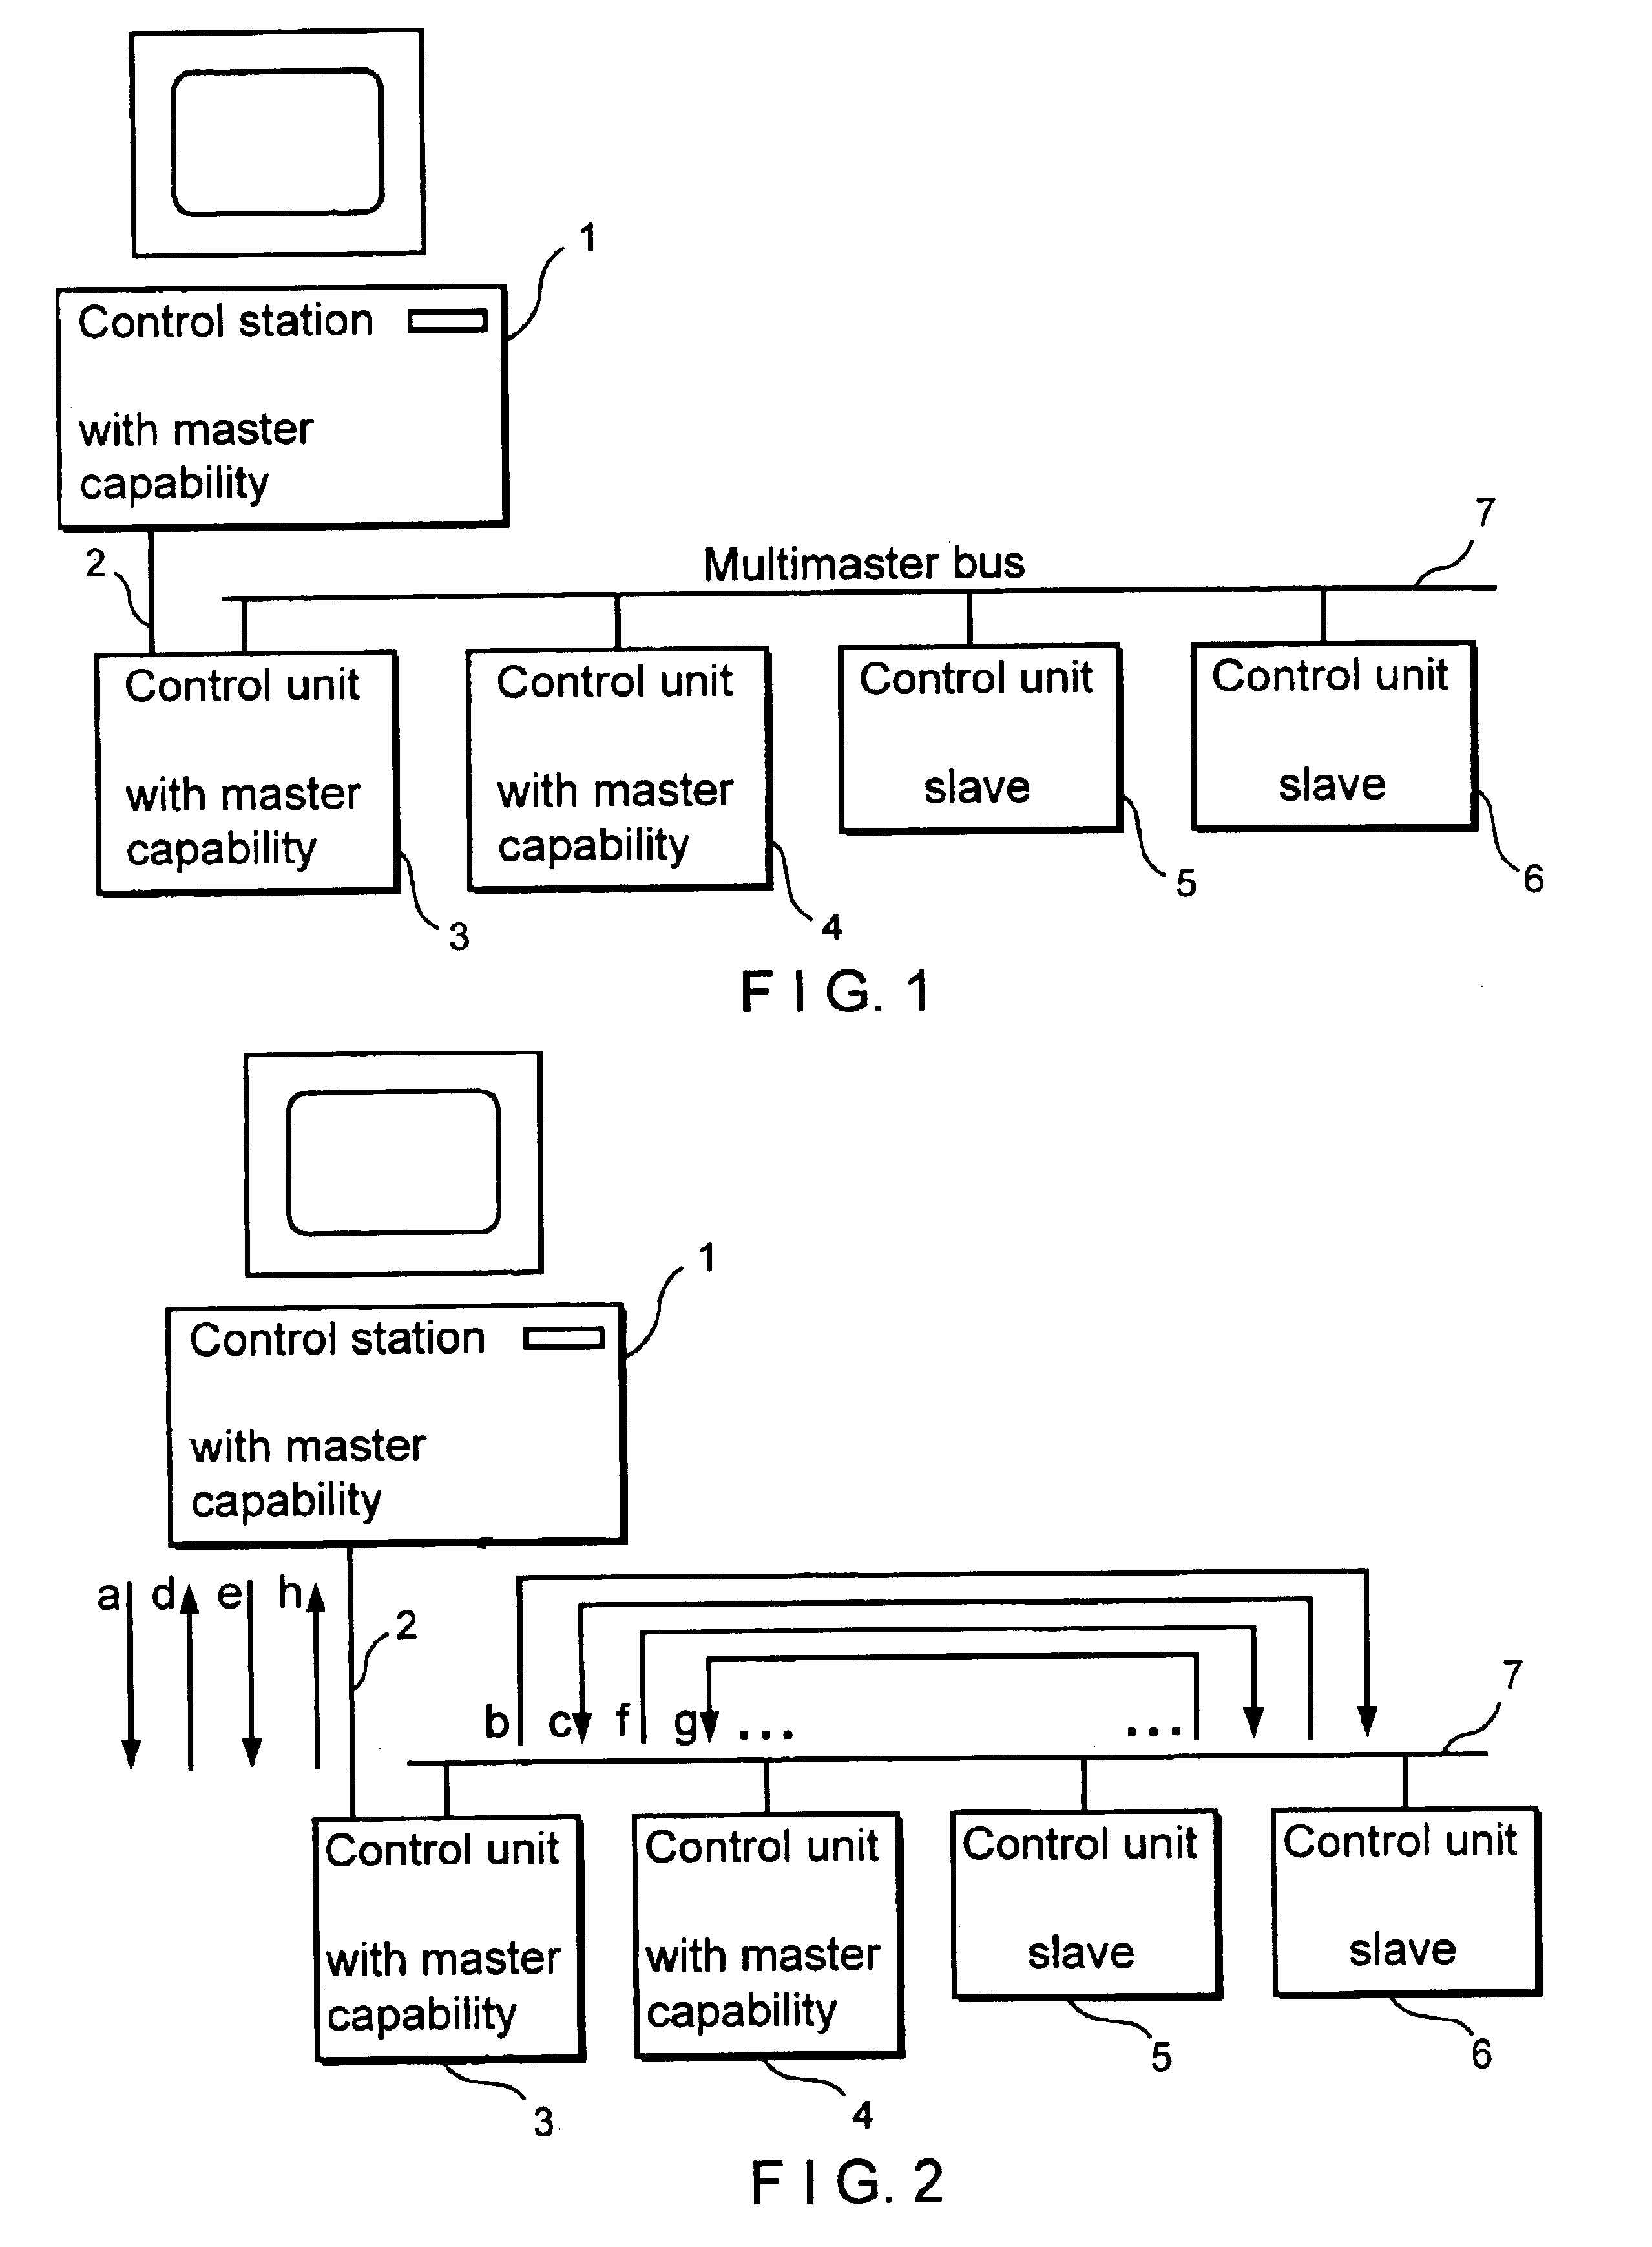 Method for monitoring a control system